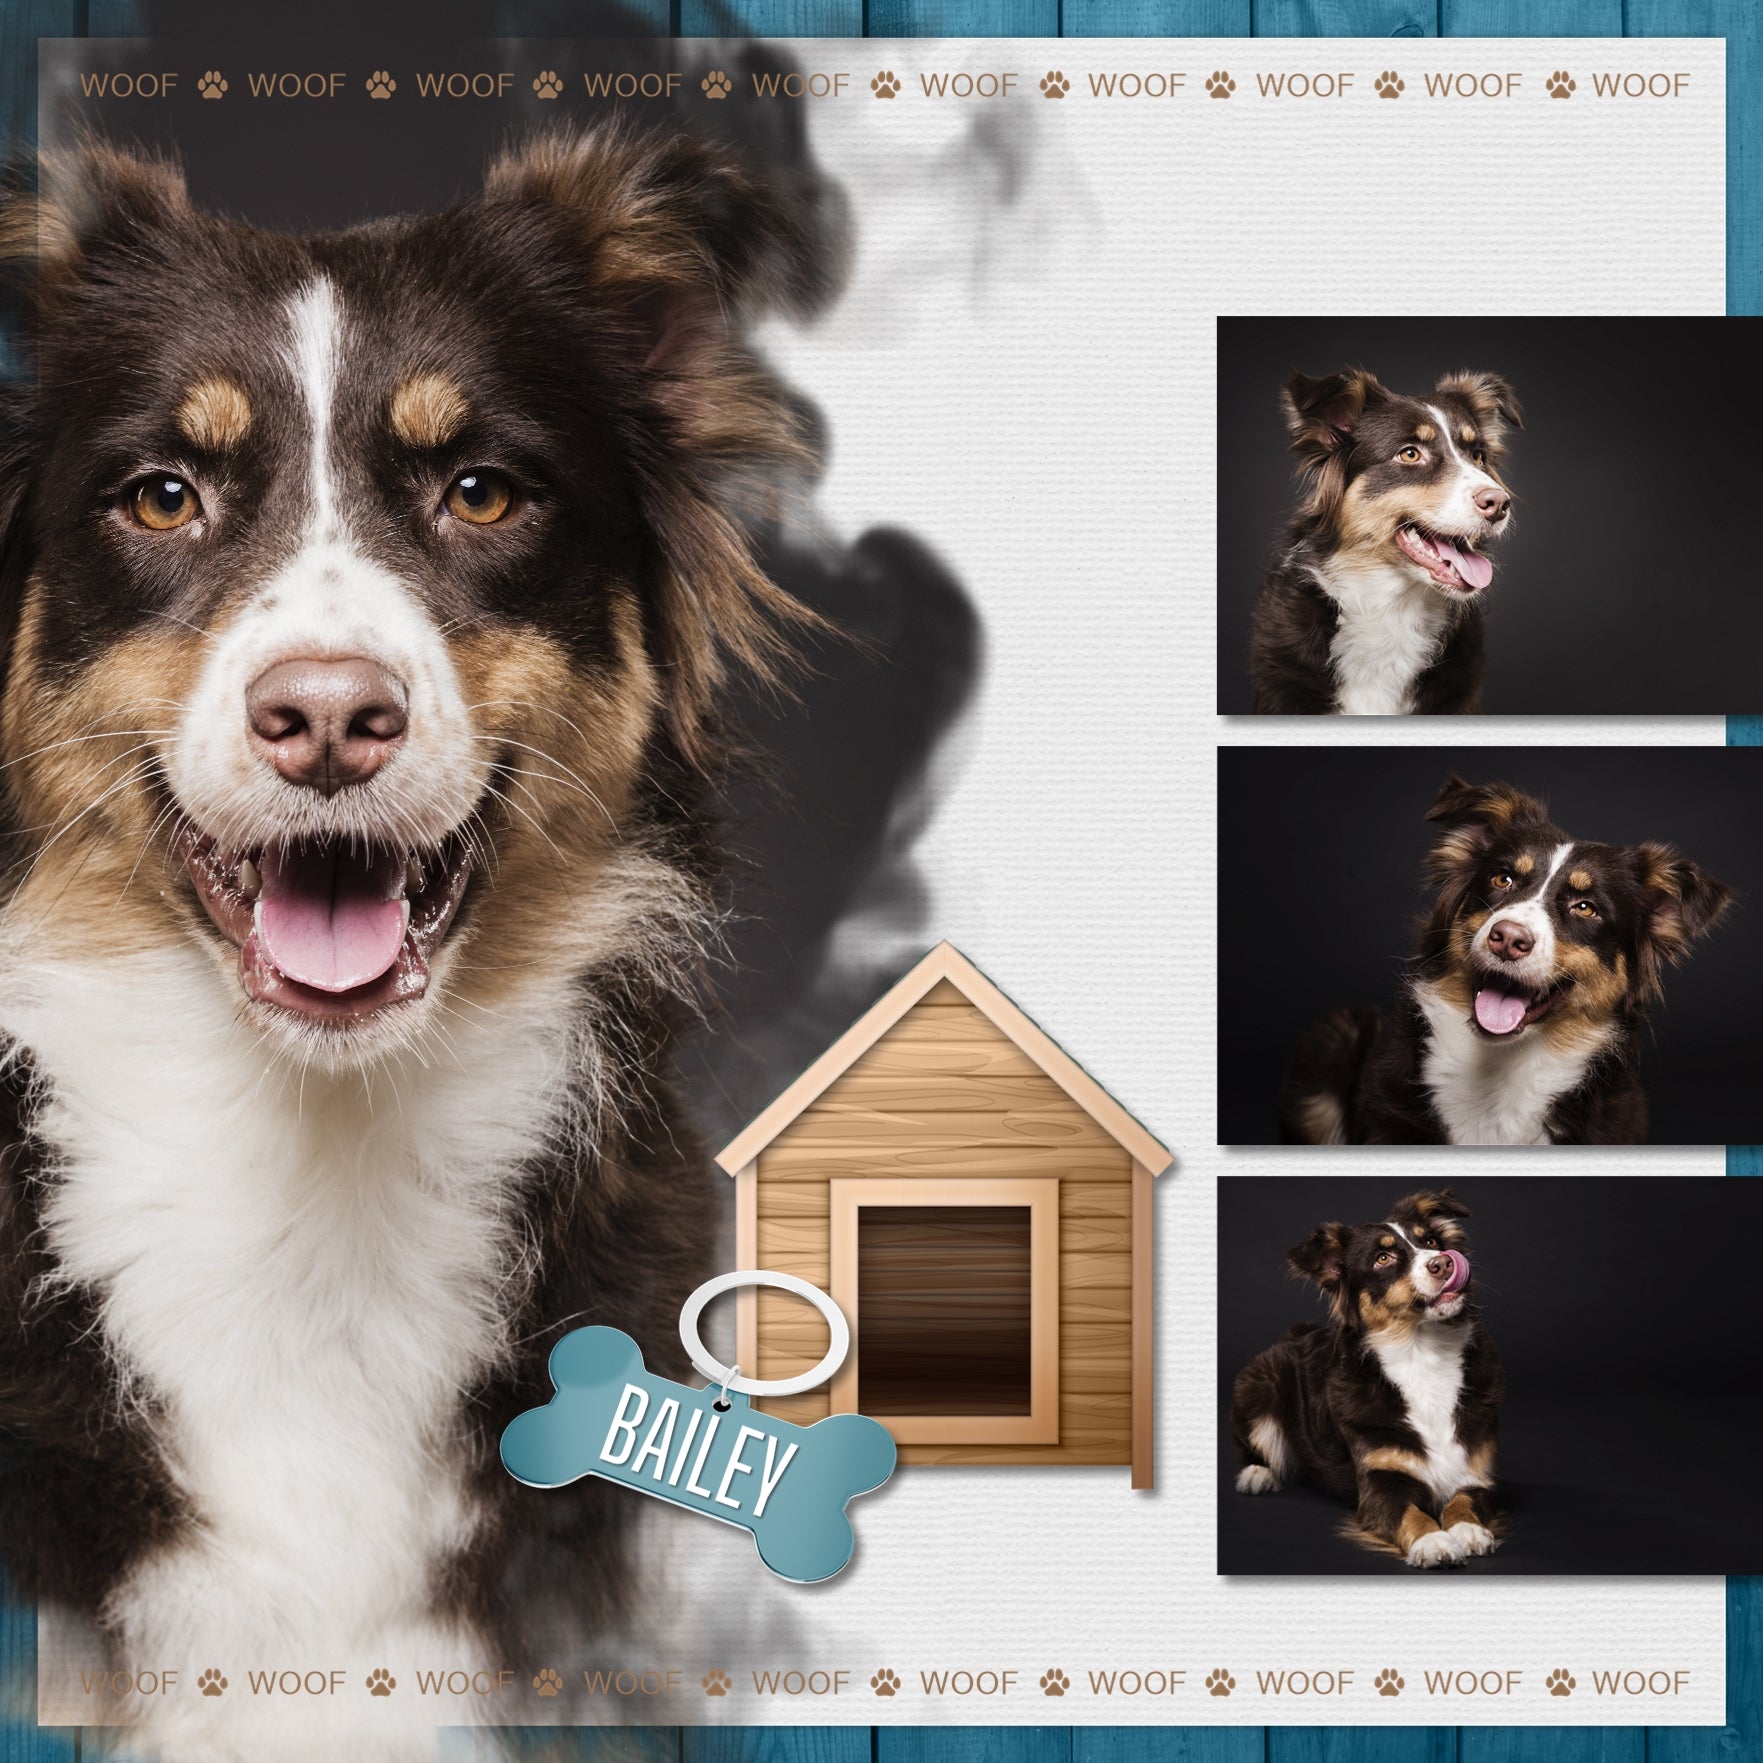 Have fun documenting your favorite dogs with these fun, realistic puppy and canine digital art embellishments by Lucky Girl Creative.